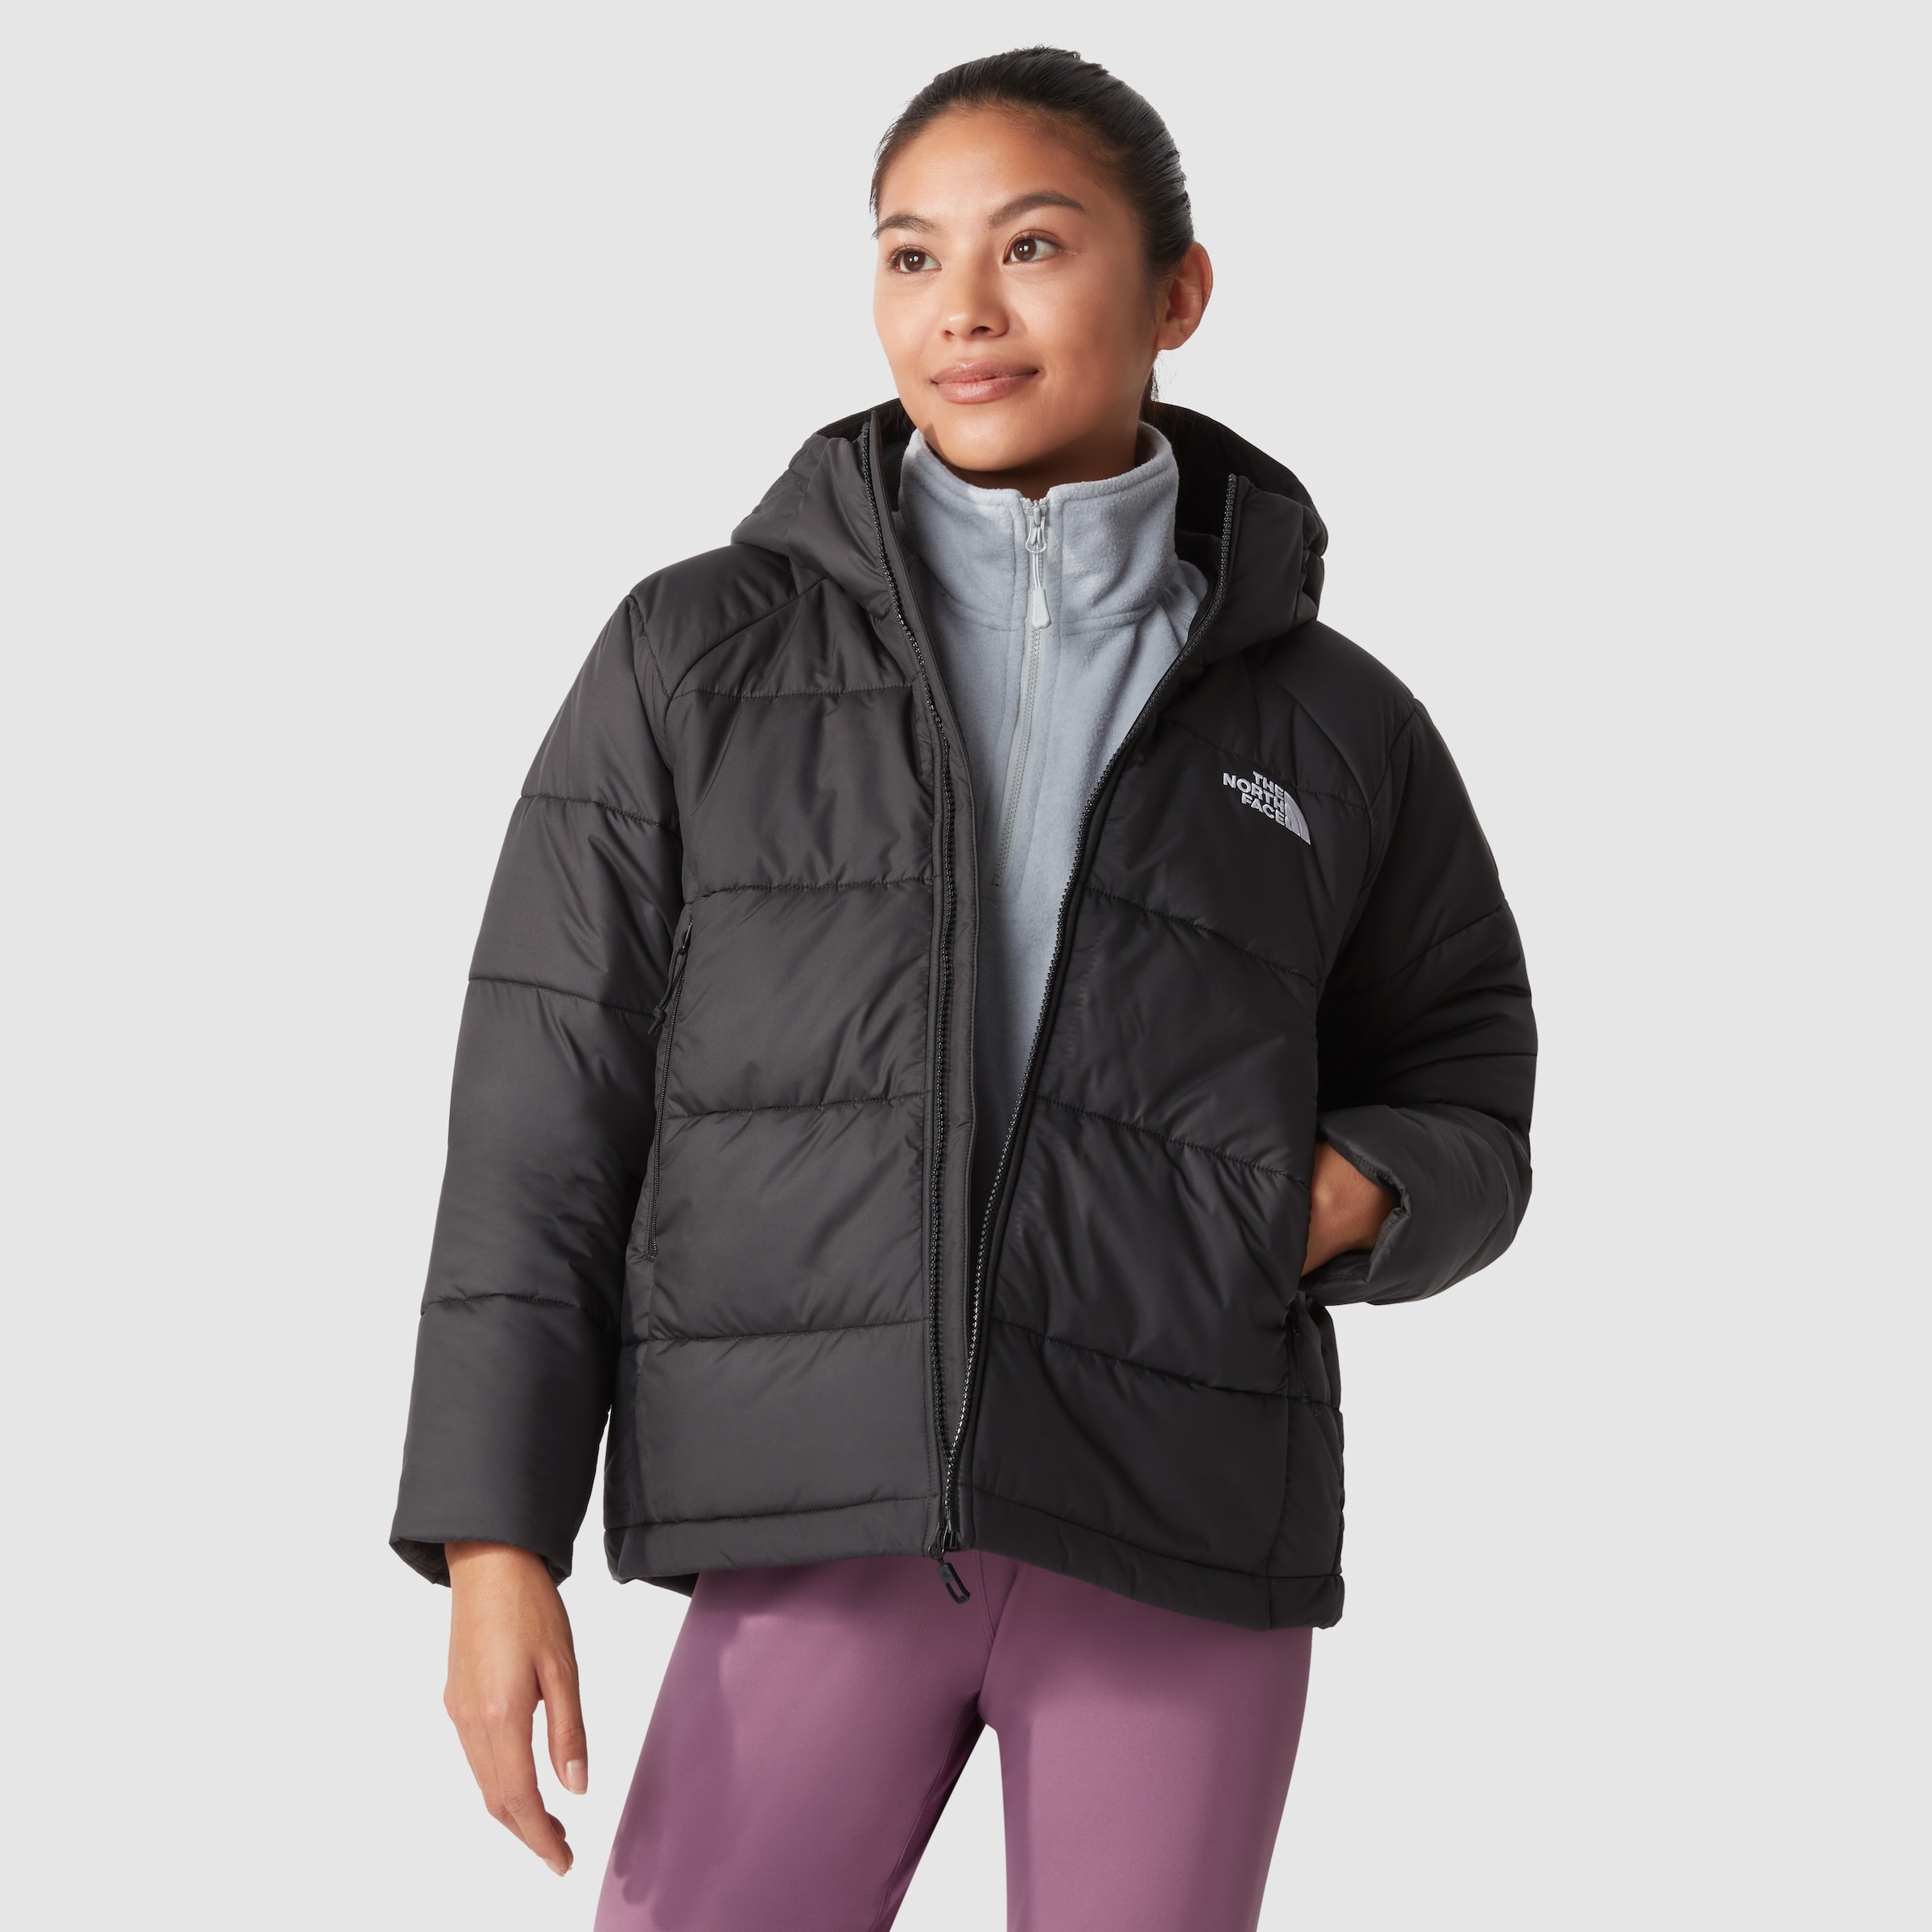 mit »W North Face The Logodruck mit HOODIE«, SYNTHETIC ♕ Funktionsjacke Kapuze, bei HYALITE